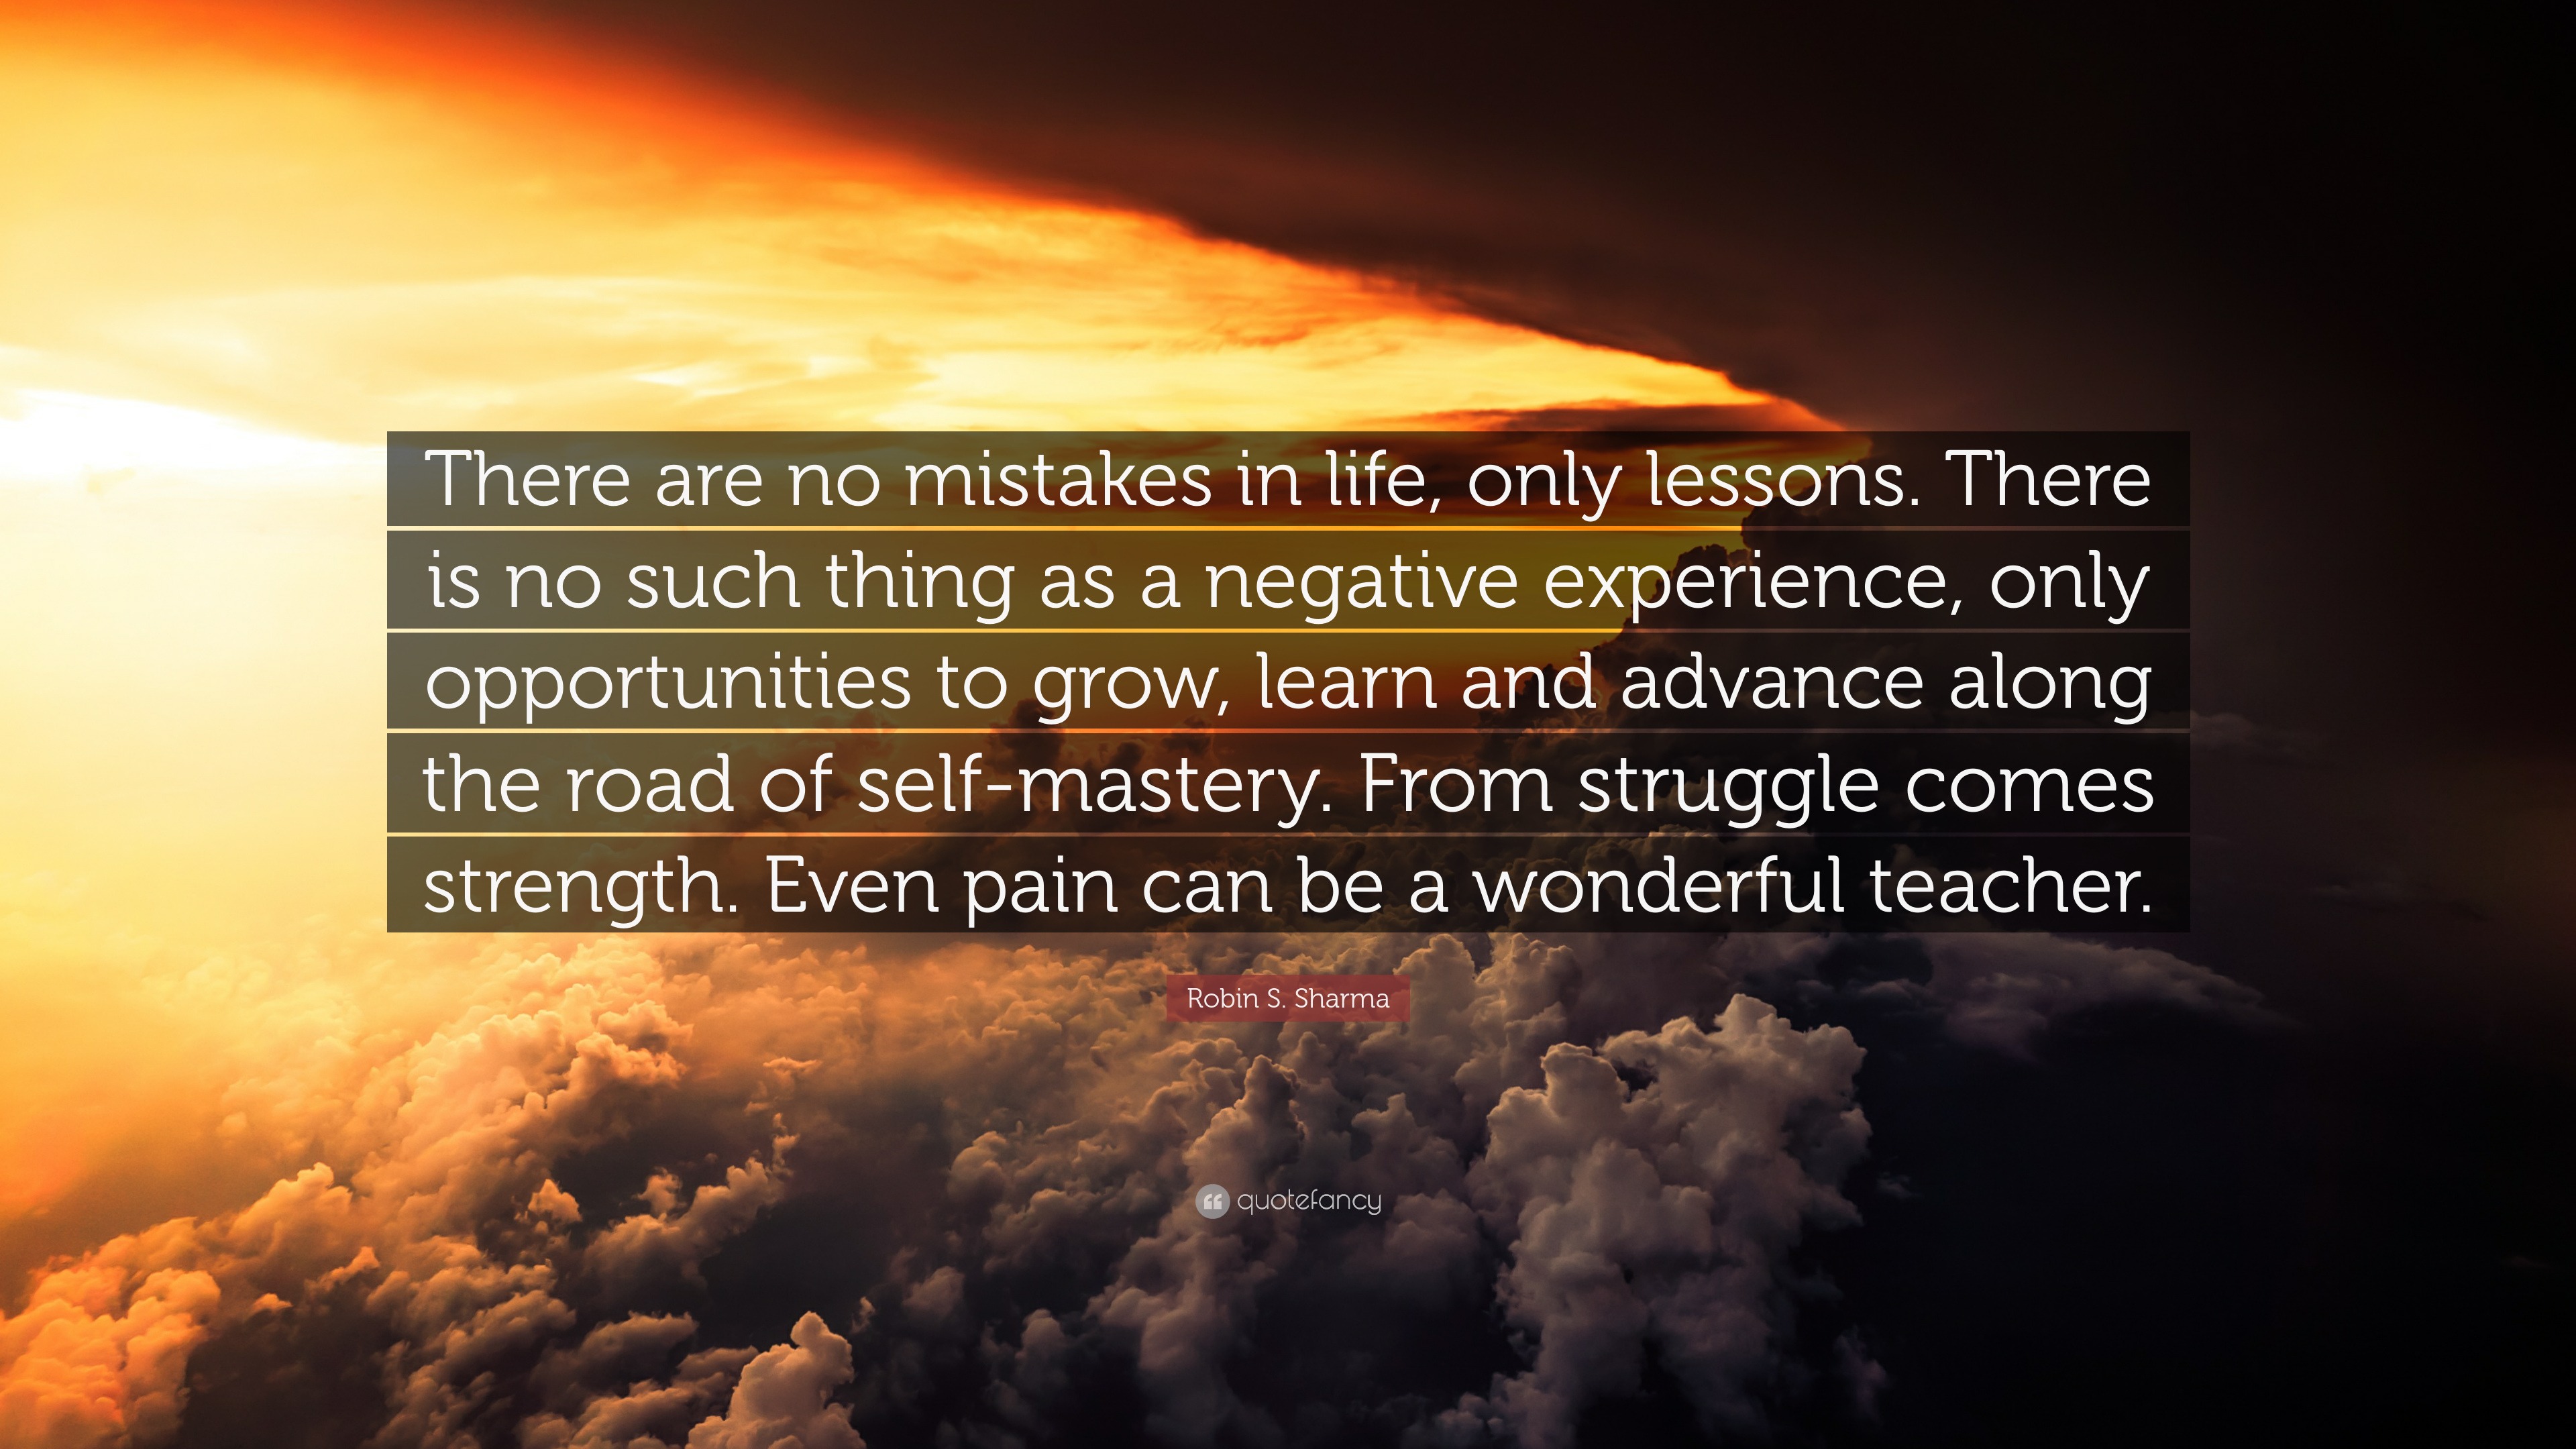 There are no Mistakes - Only Lessons - Center for Change